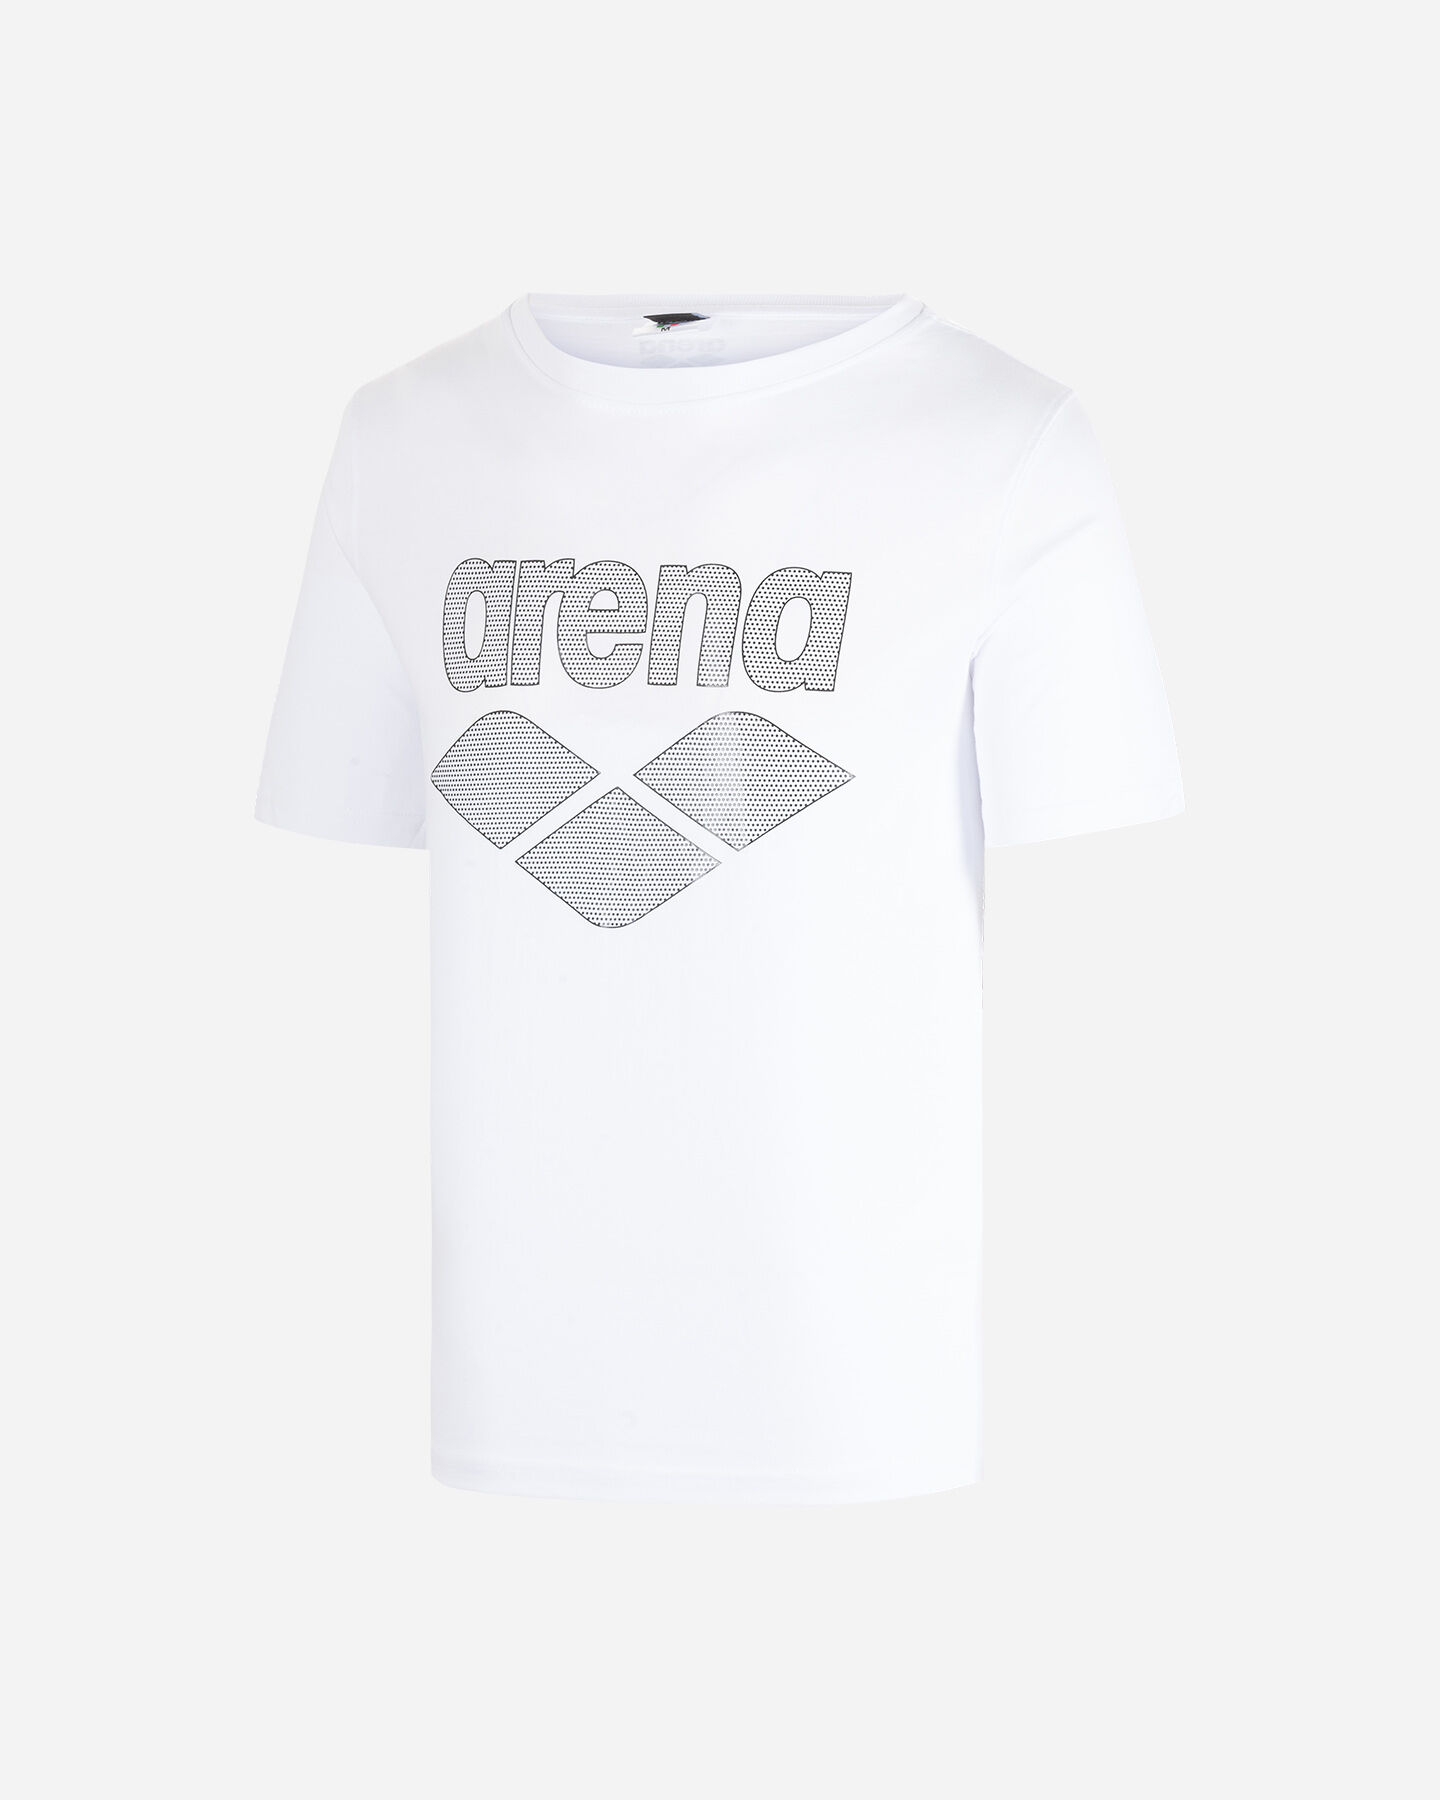  T-Shirt ARENA  BIG LOGO M S4080907|001|S scatto 0